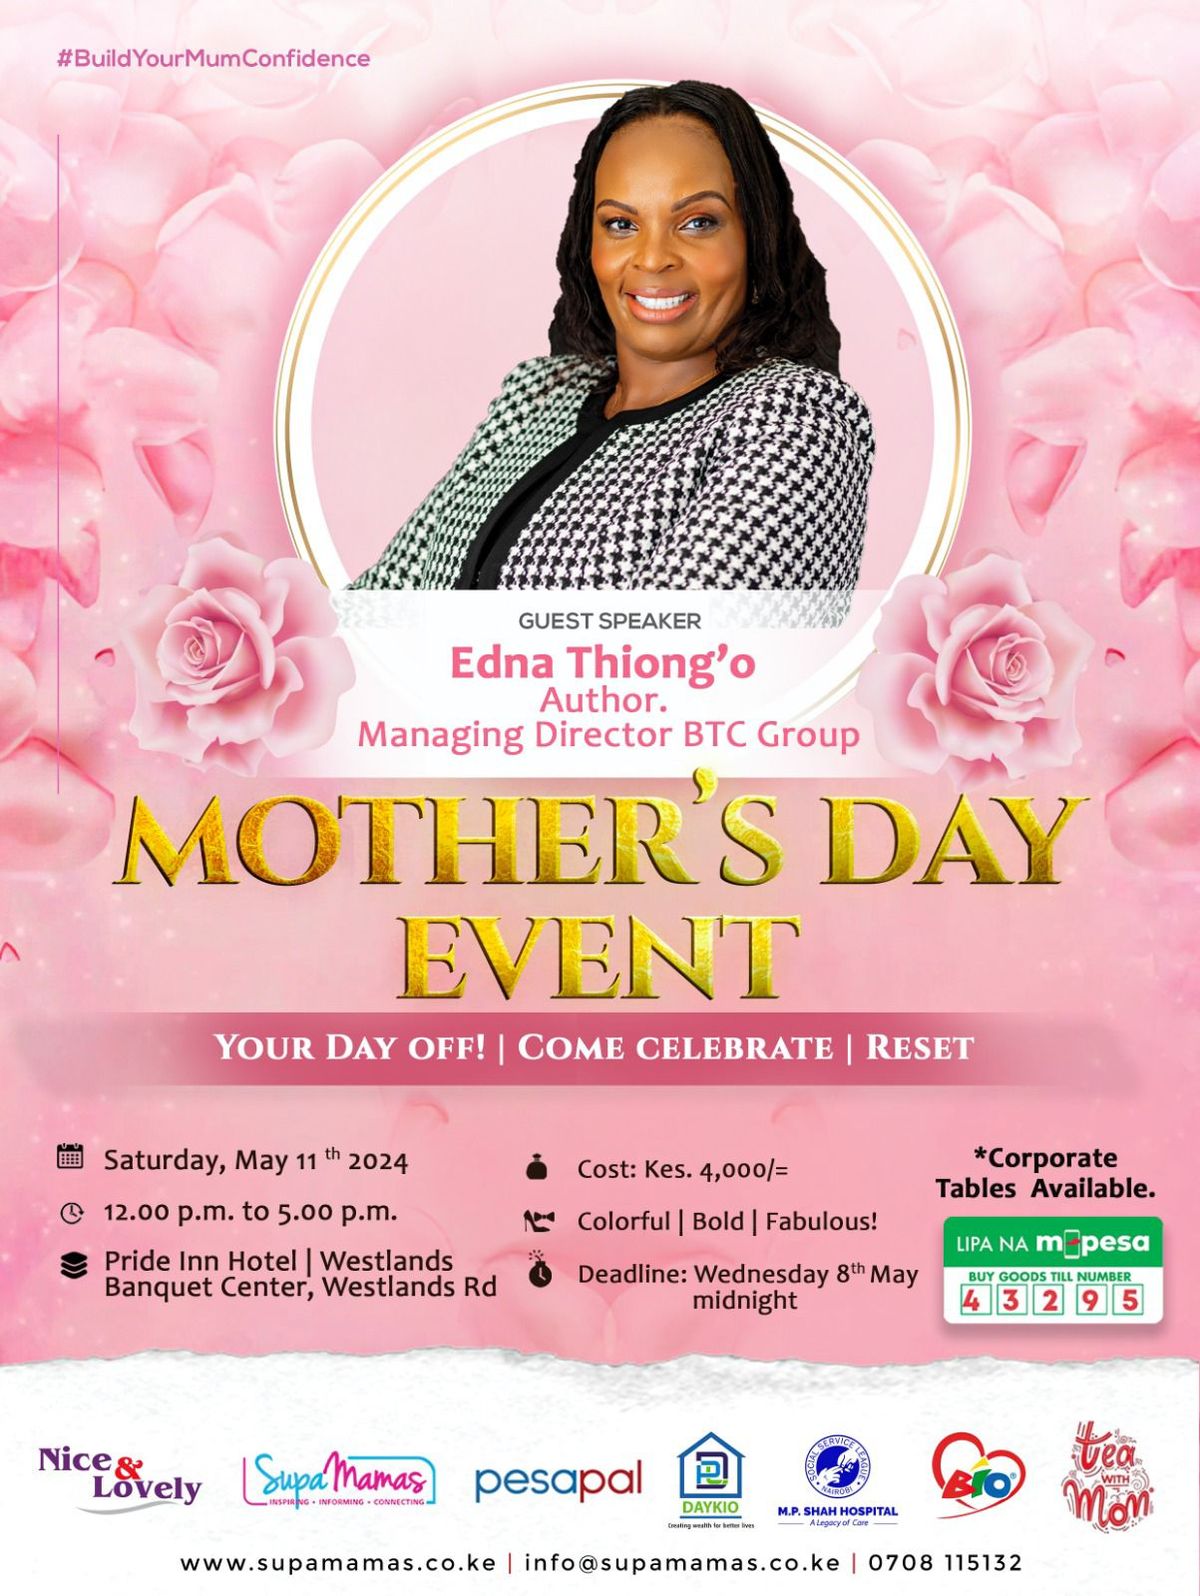 Supamamas Mother's Day Event